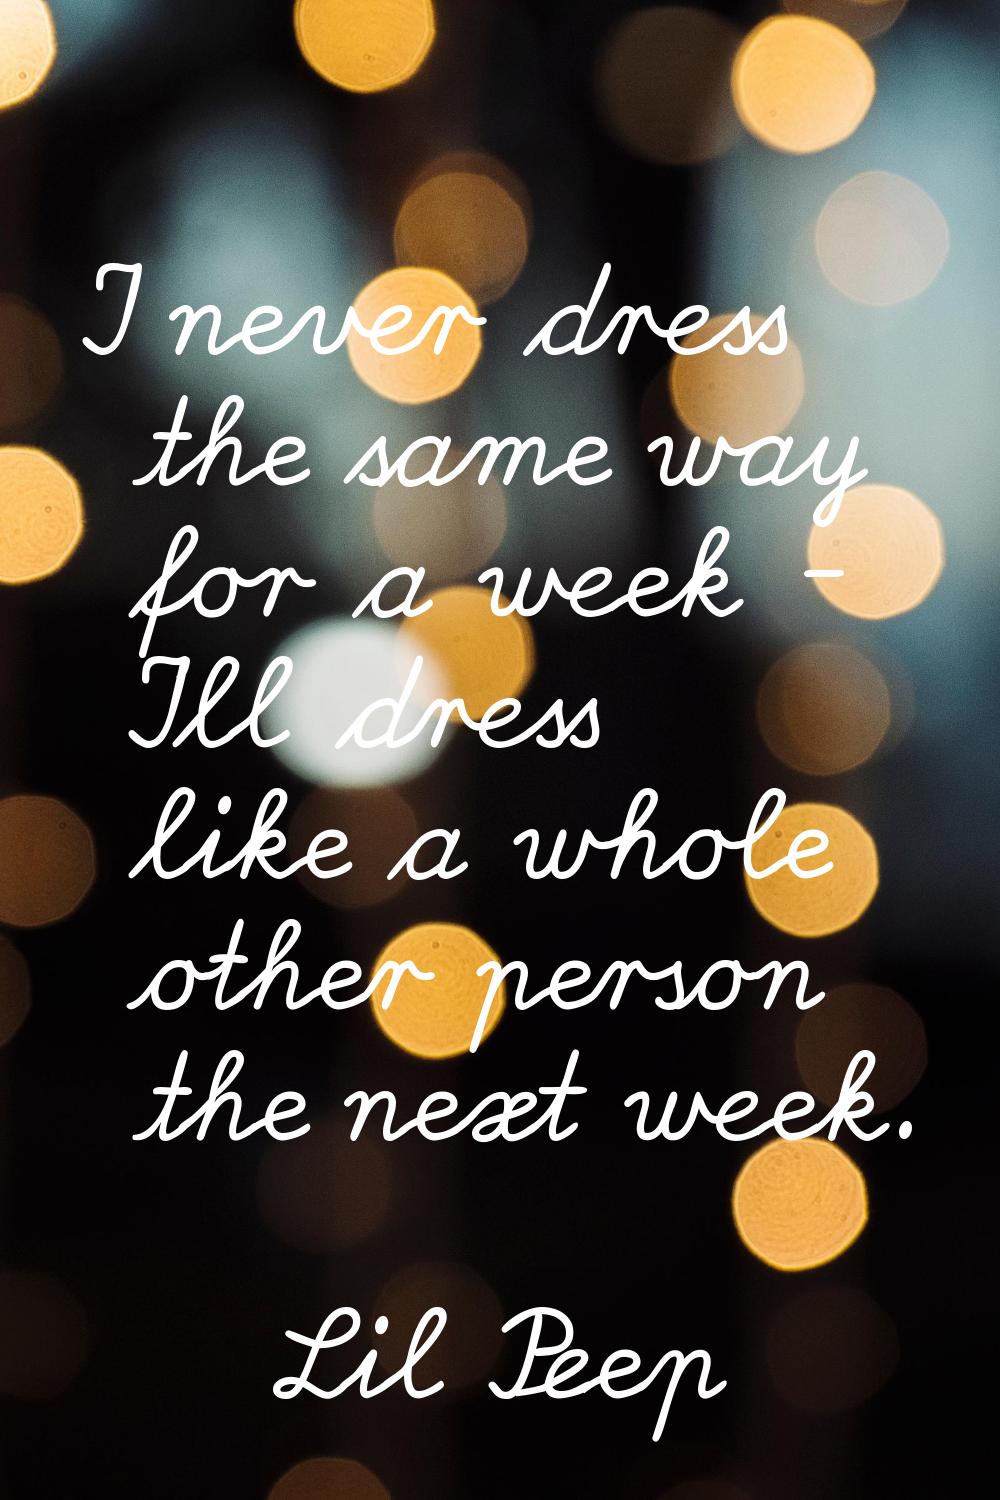 I never dress the same way for a week - I'll dress like a whole other person the next week.